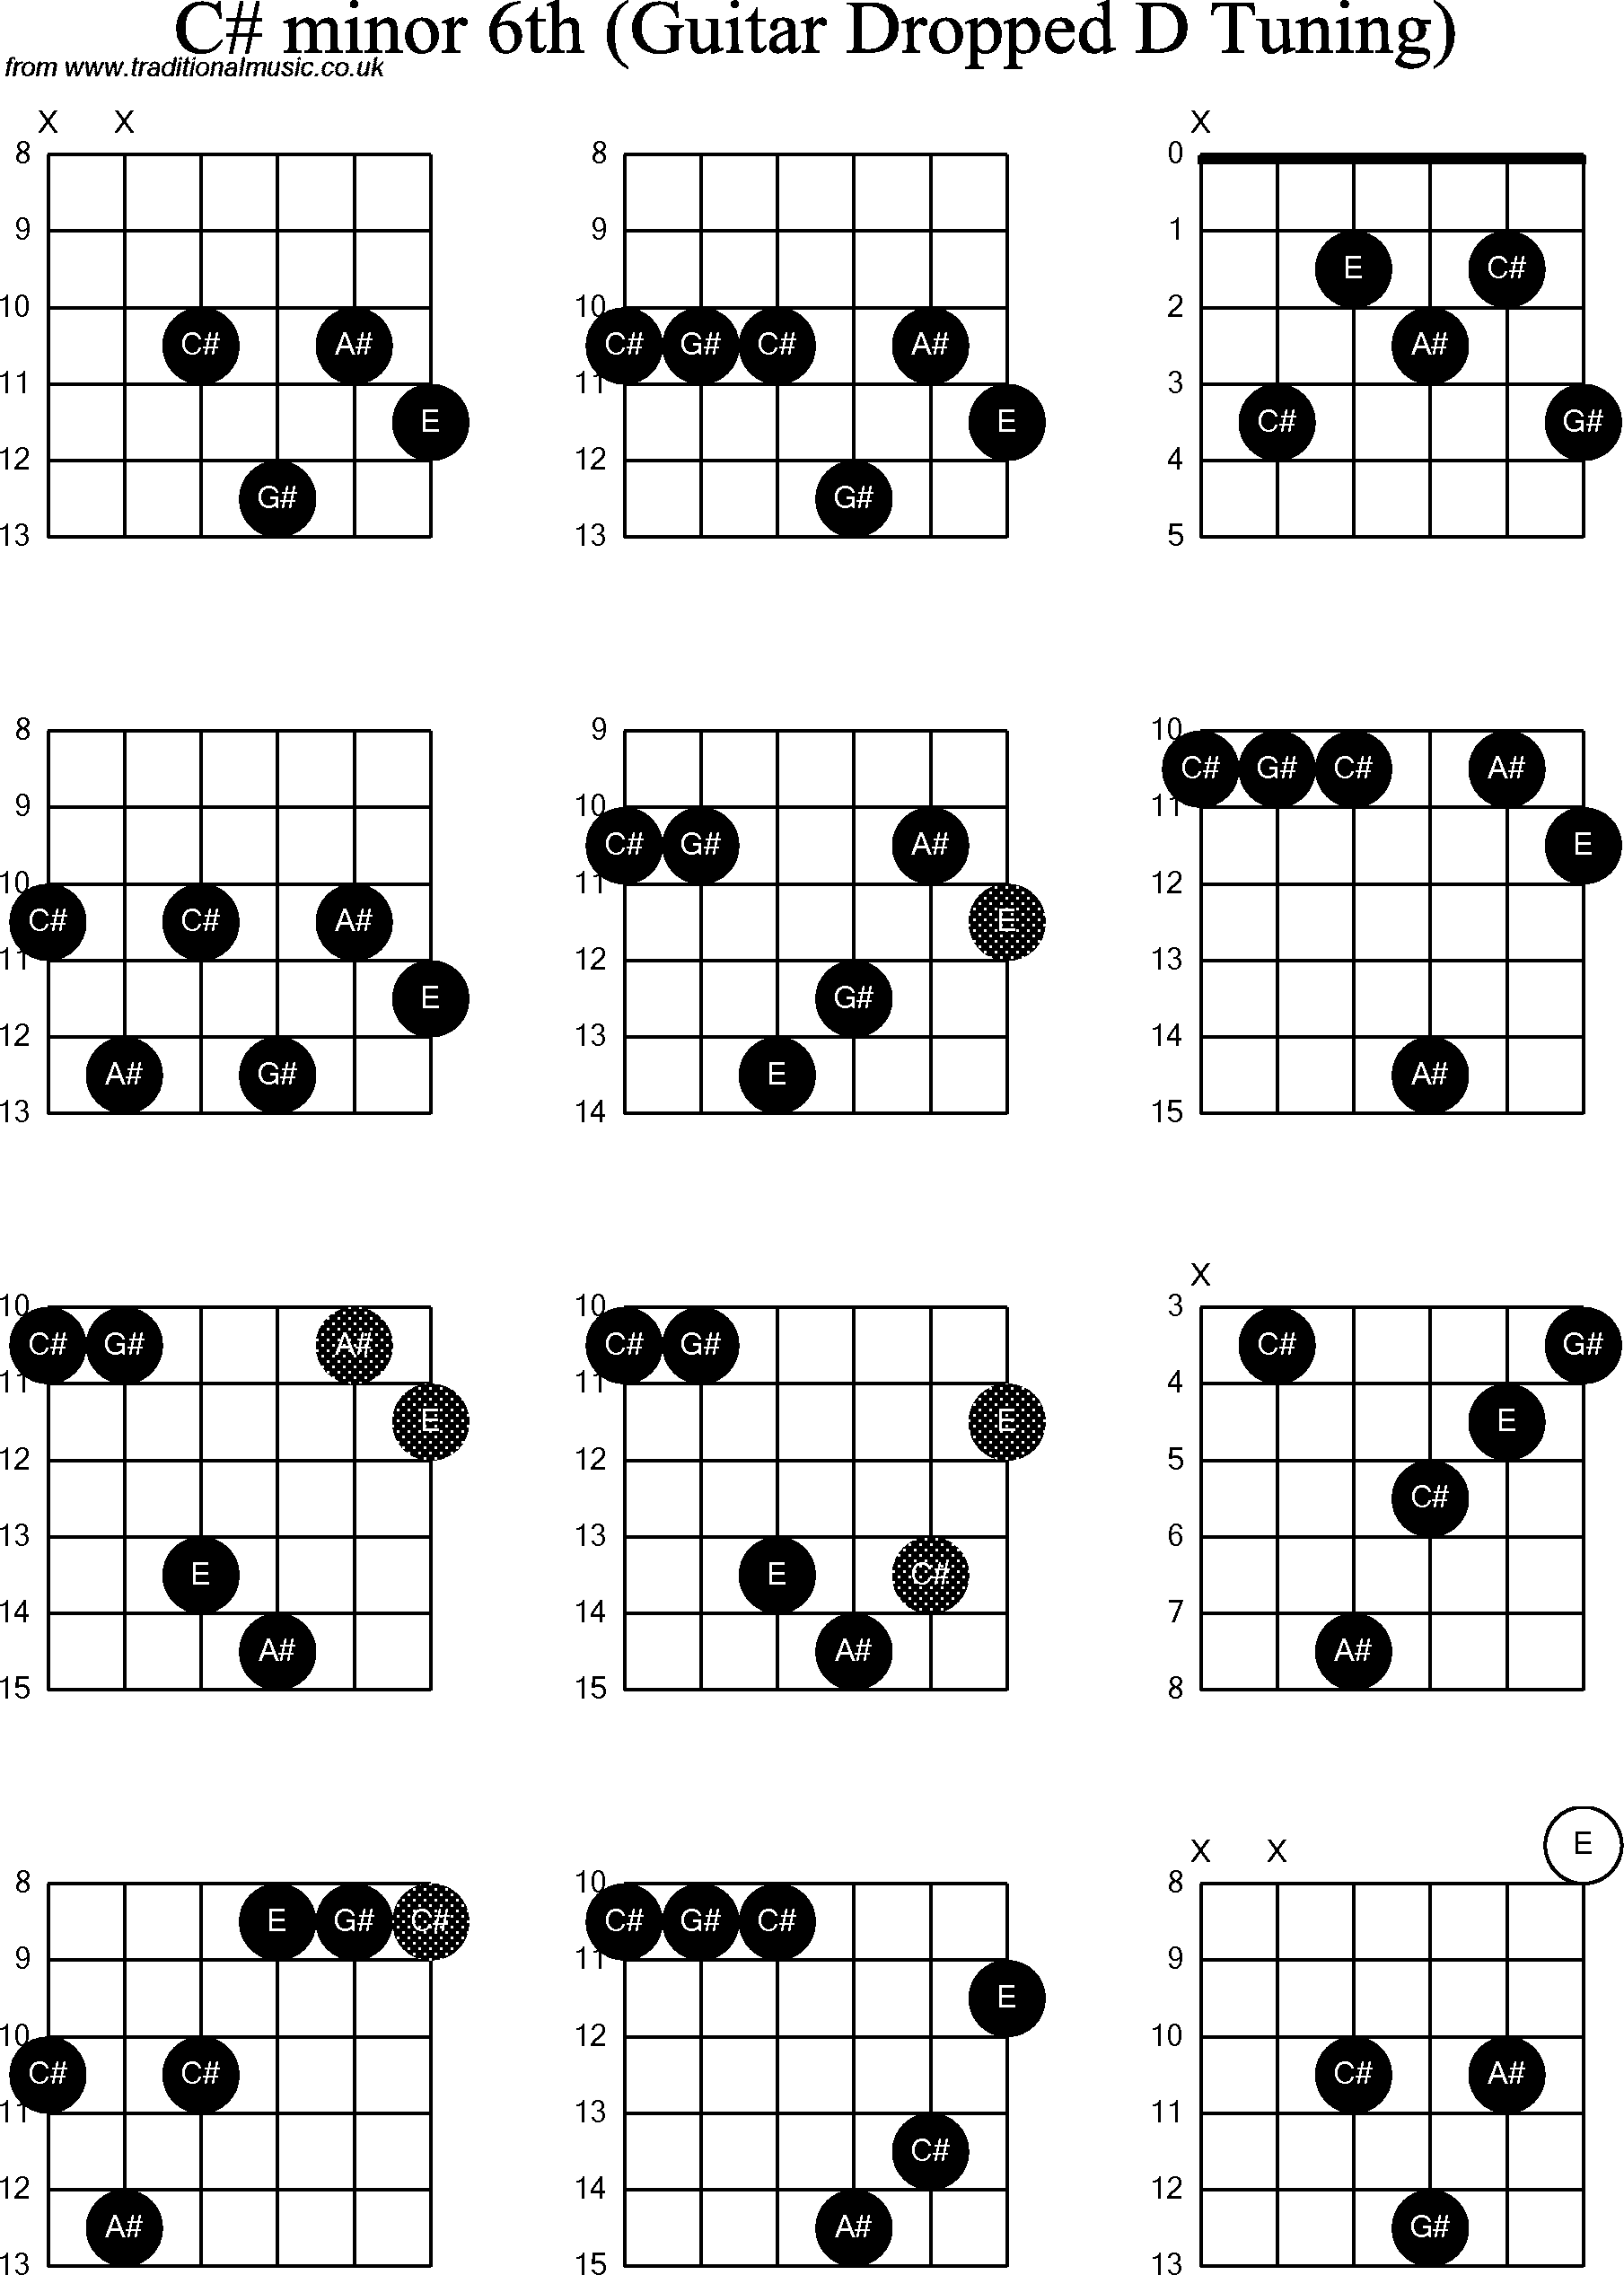 Chord diagrams for dropped D Guitar(DADGBE), C Sharp Minor6th